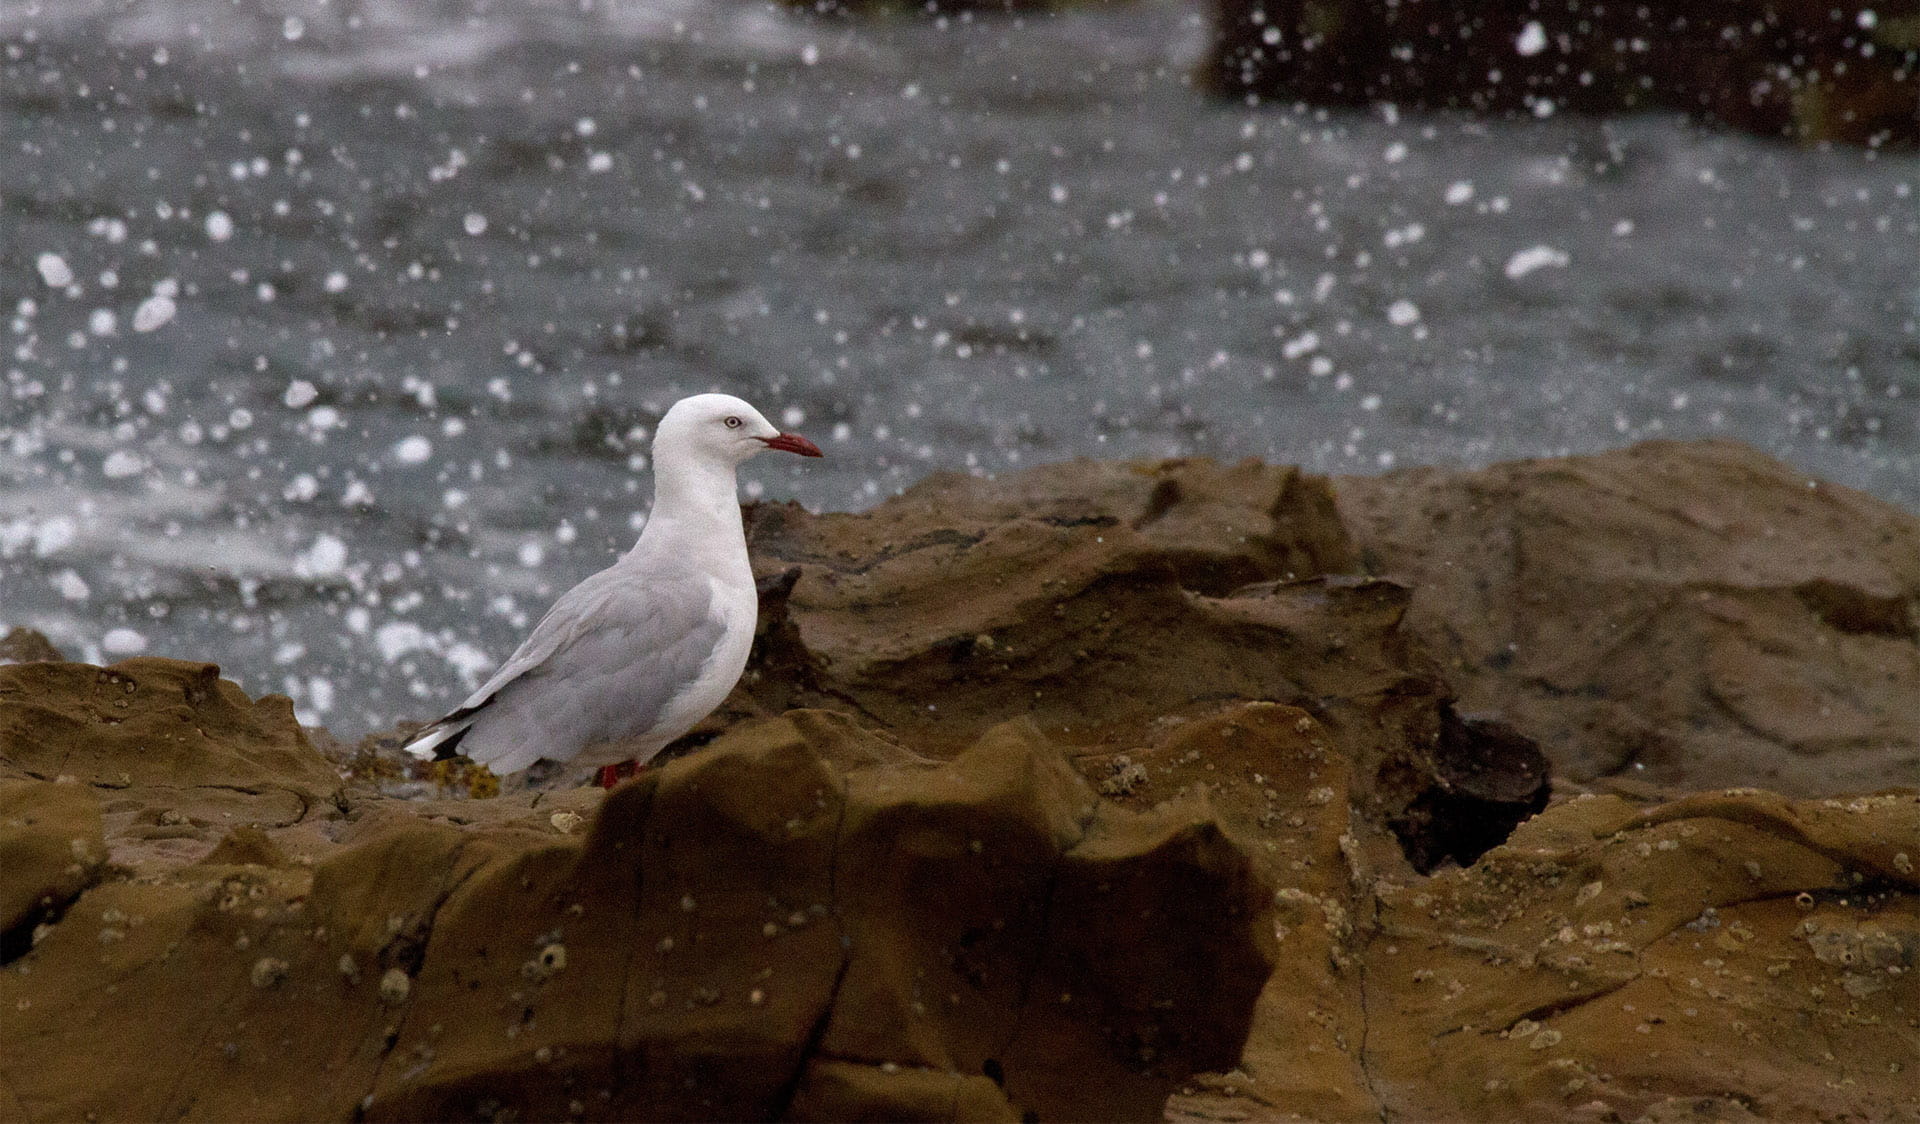 A seagull sitting on a rock with waves splashing in the background.